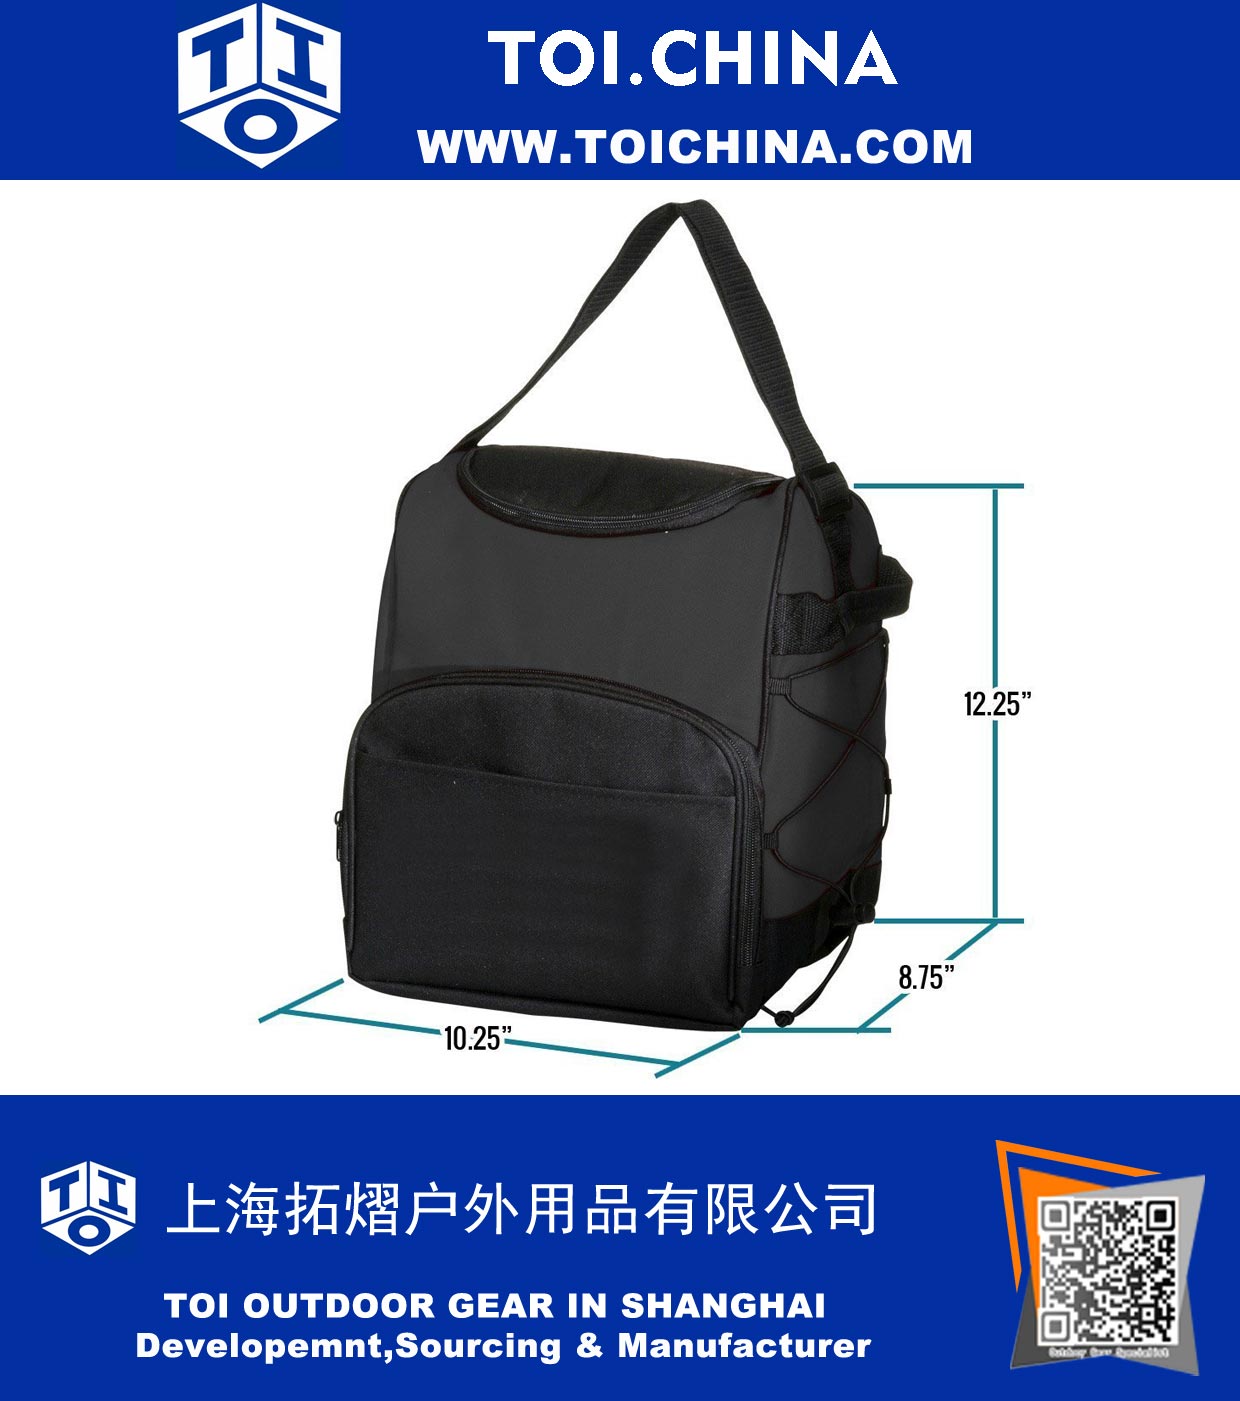 Large Insulated Cooler Bag